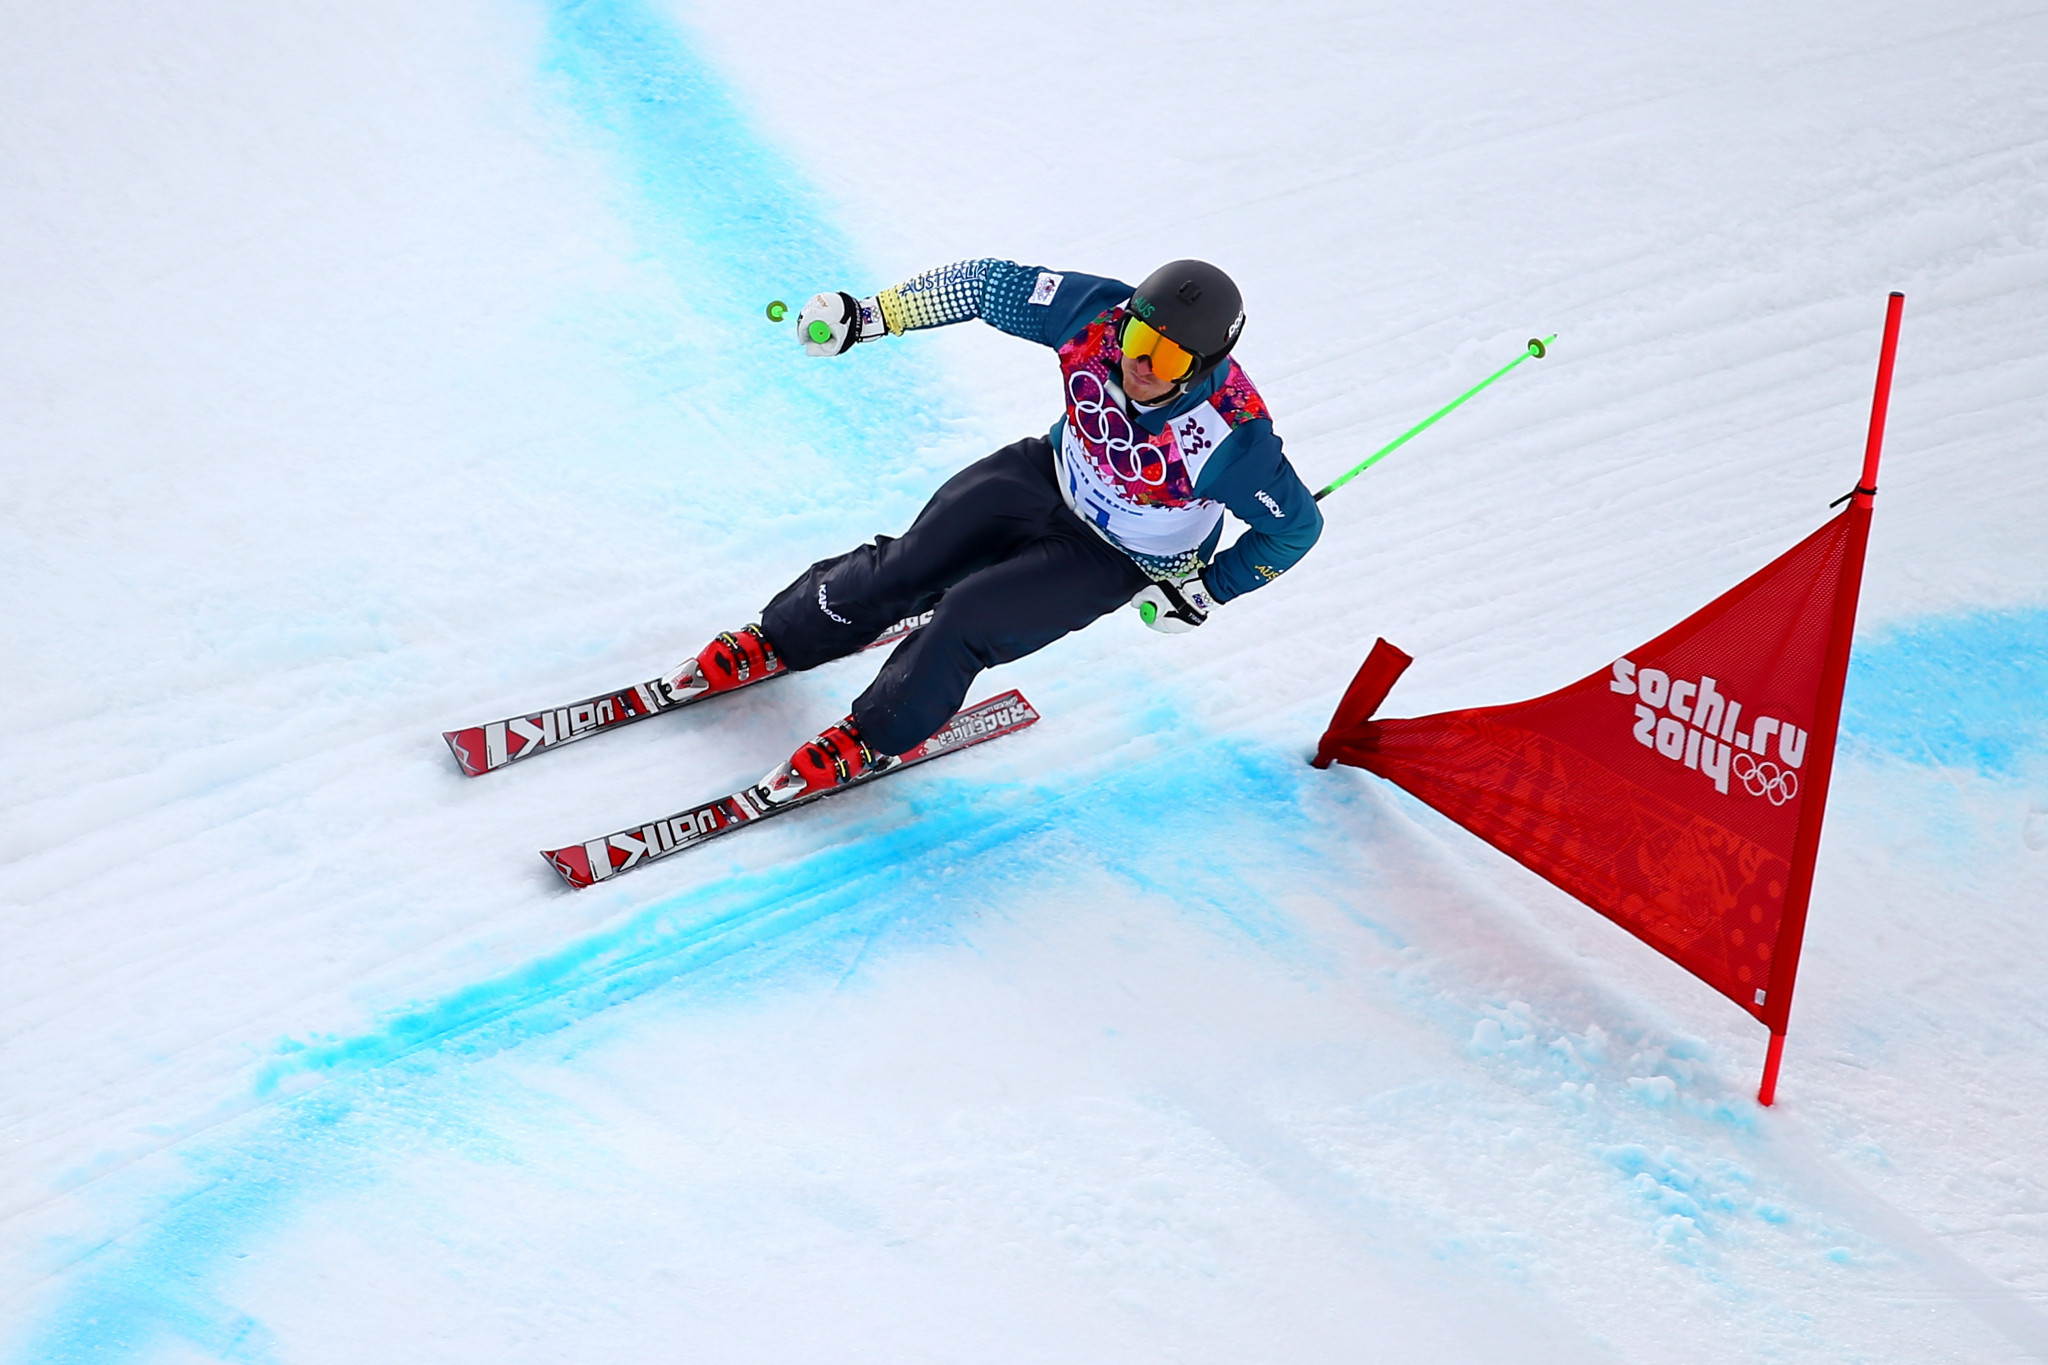 Scott Kneller has represented Australia in two Winter Olympic Games, including Sochi 2014 ©Getty Images